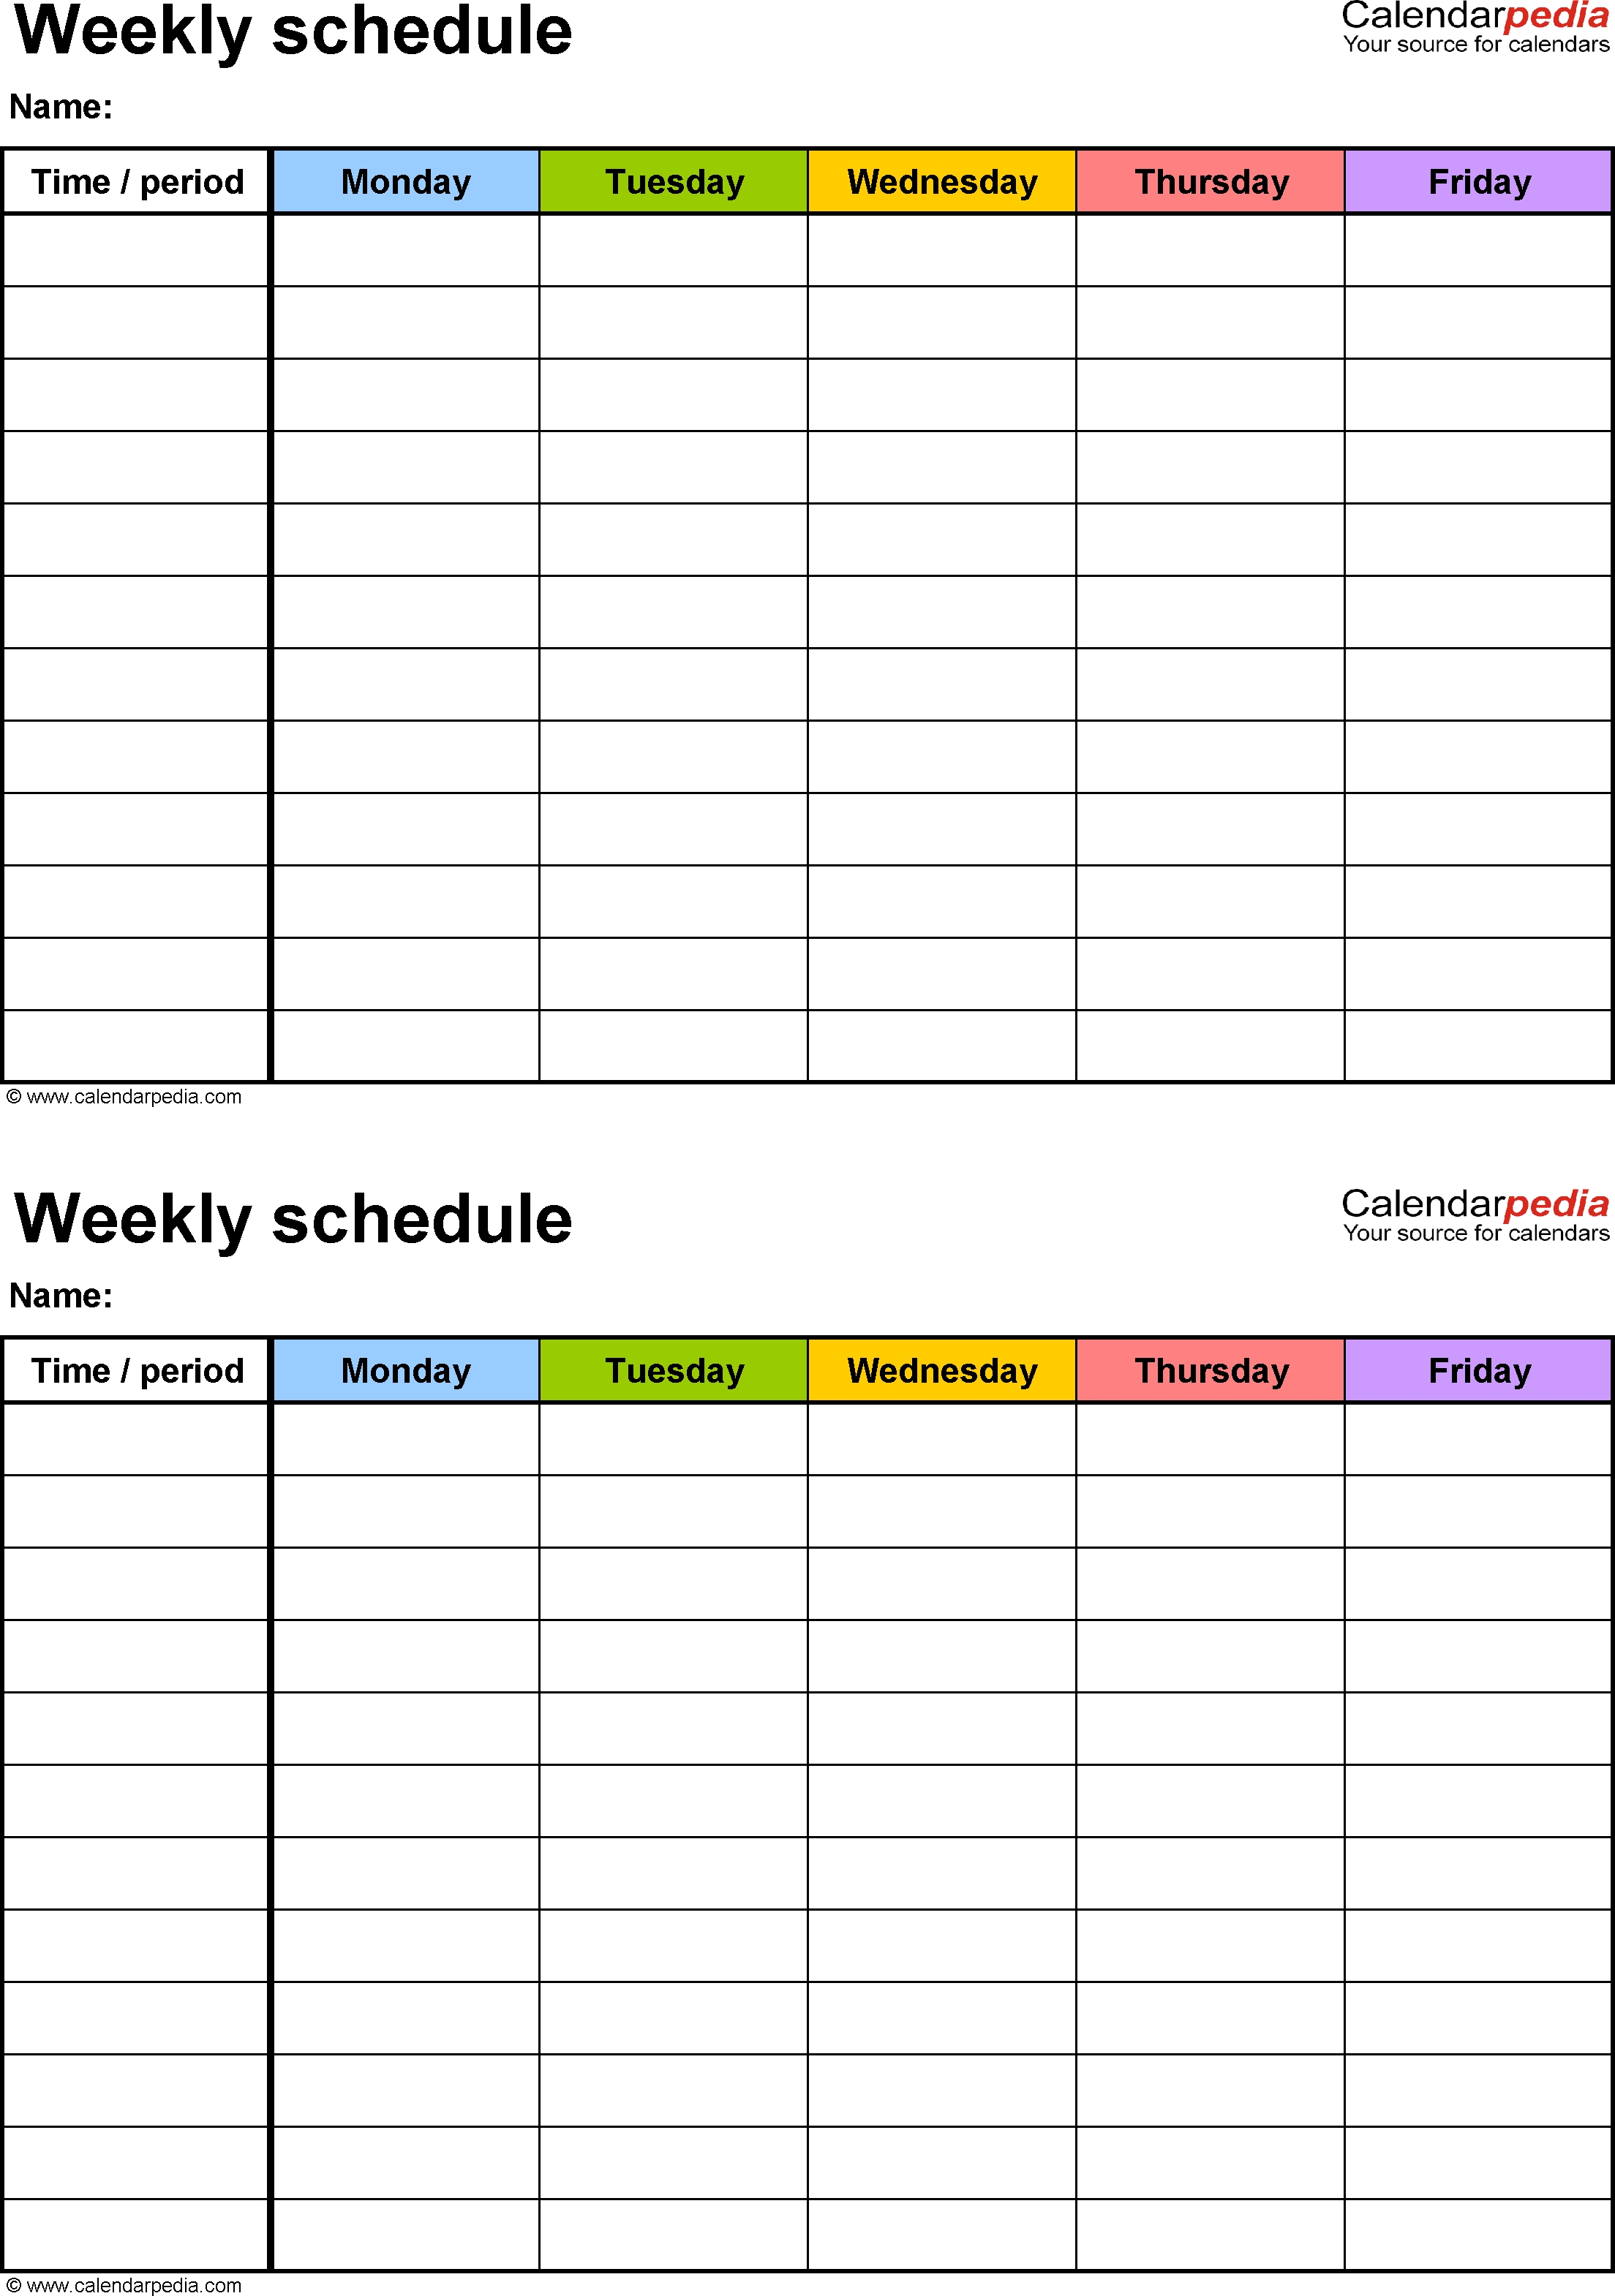 Free Weekly Schedule Templates For Word - 18 Templates-Blank Calendar Monday To Friday